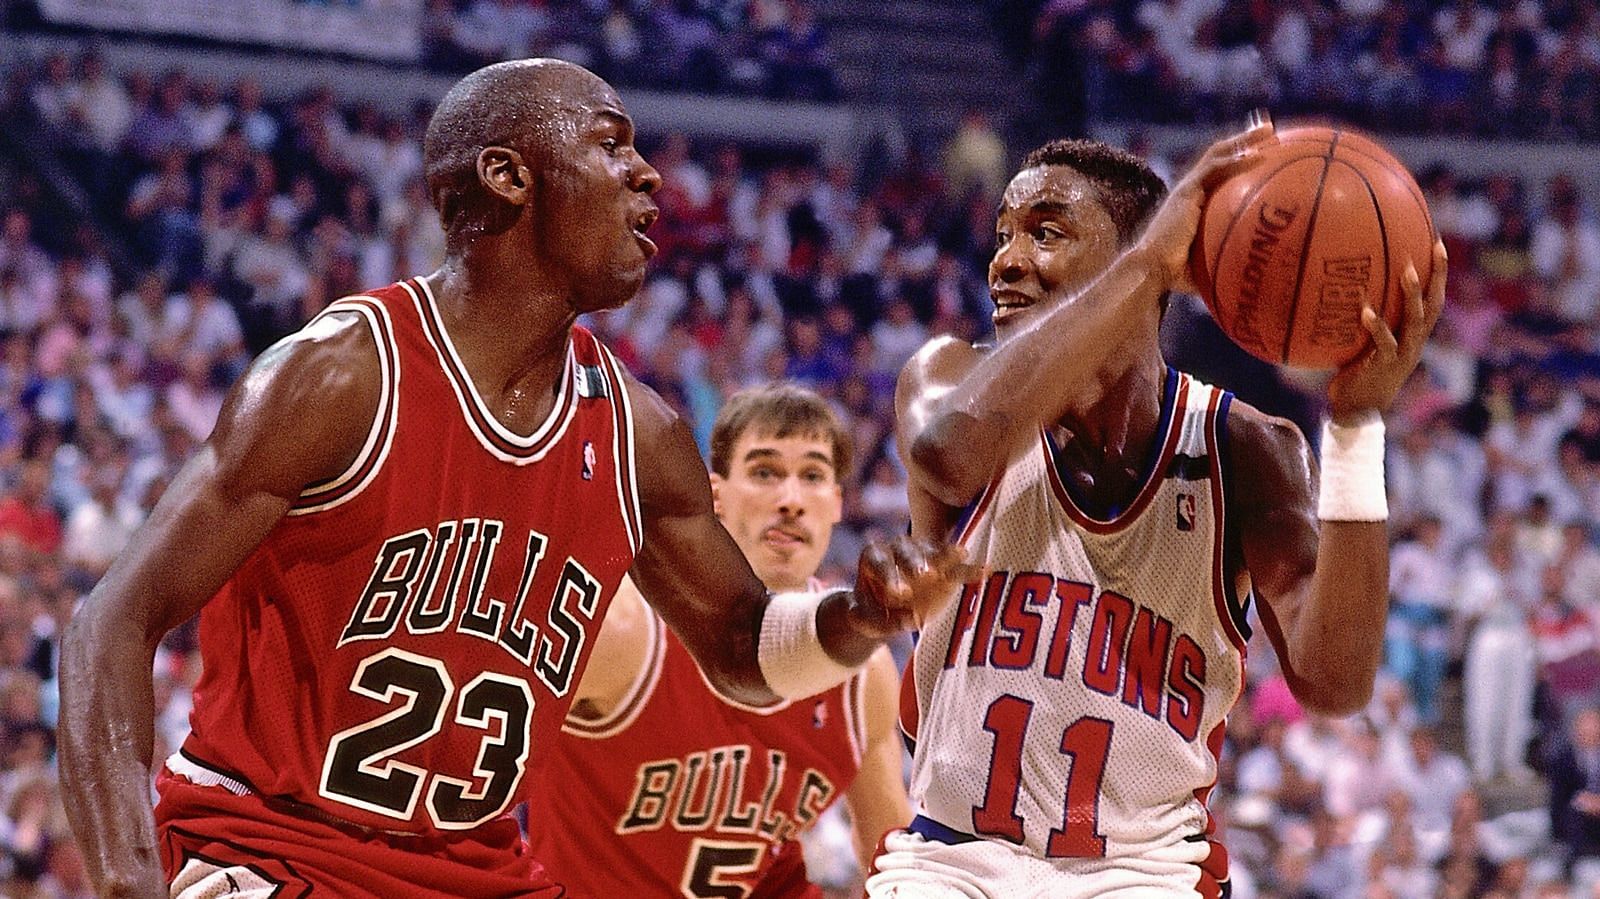 Once Michael Jordan got past the Bad Boy Pistons, it was all over for the league. [Photo: NBA.com]